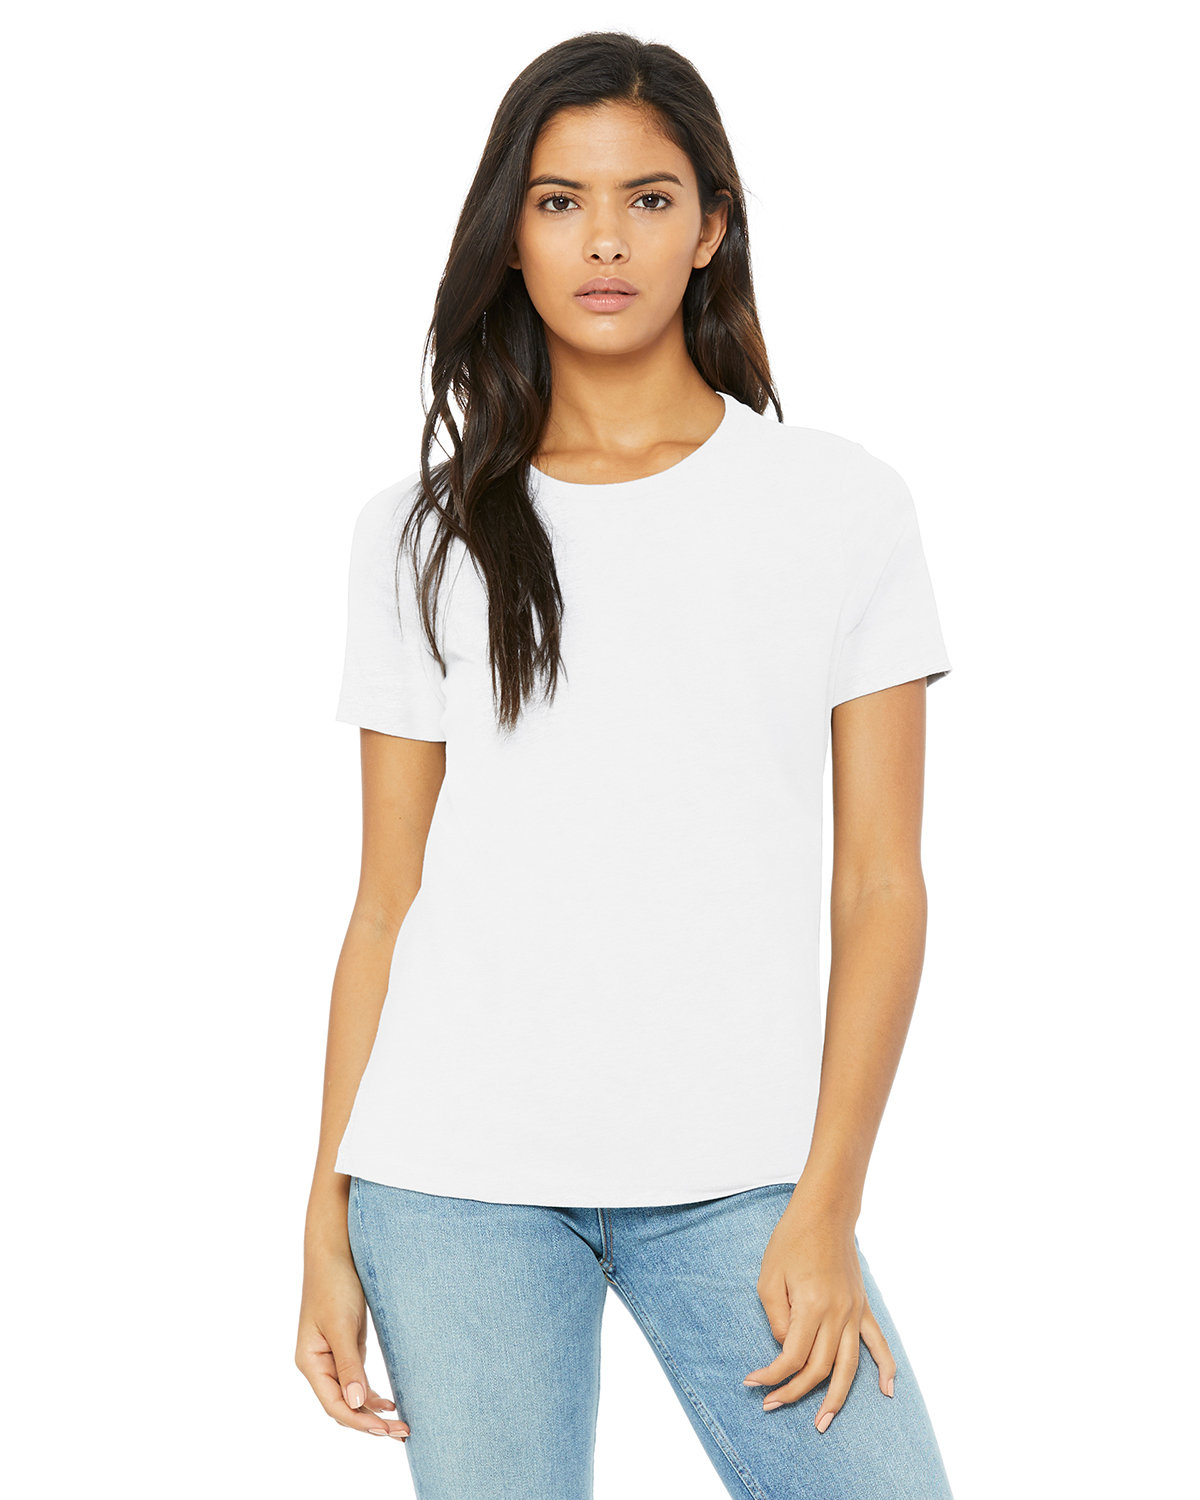 Bella + Canvas Ladies' Relaxed Jersey Short-Sleeve T-Shirt WHITE 